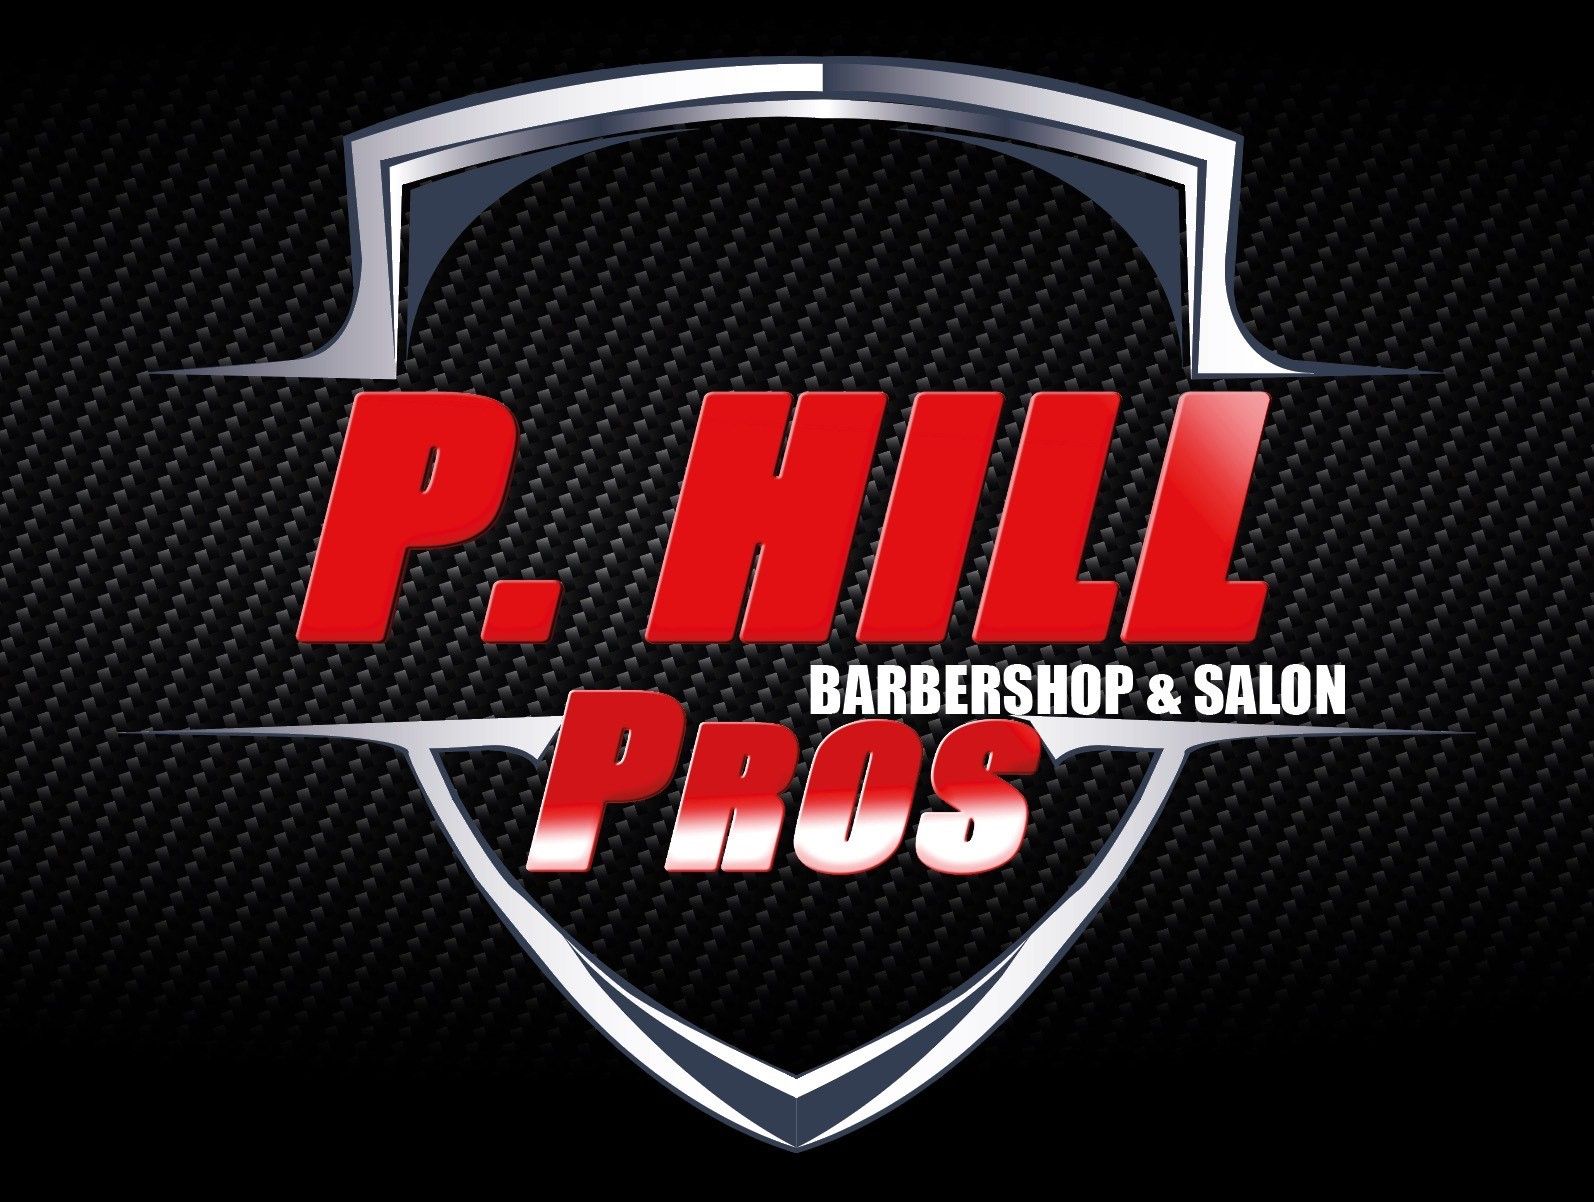 p.hillpros, 3237 S John Young Pkwy, Kissimmee, FL, 34746